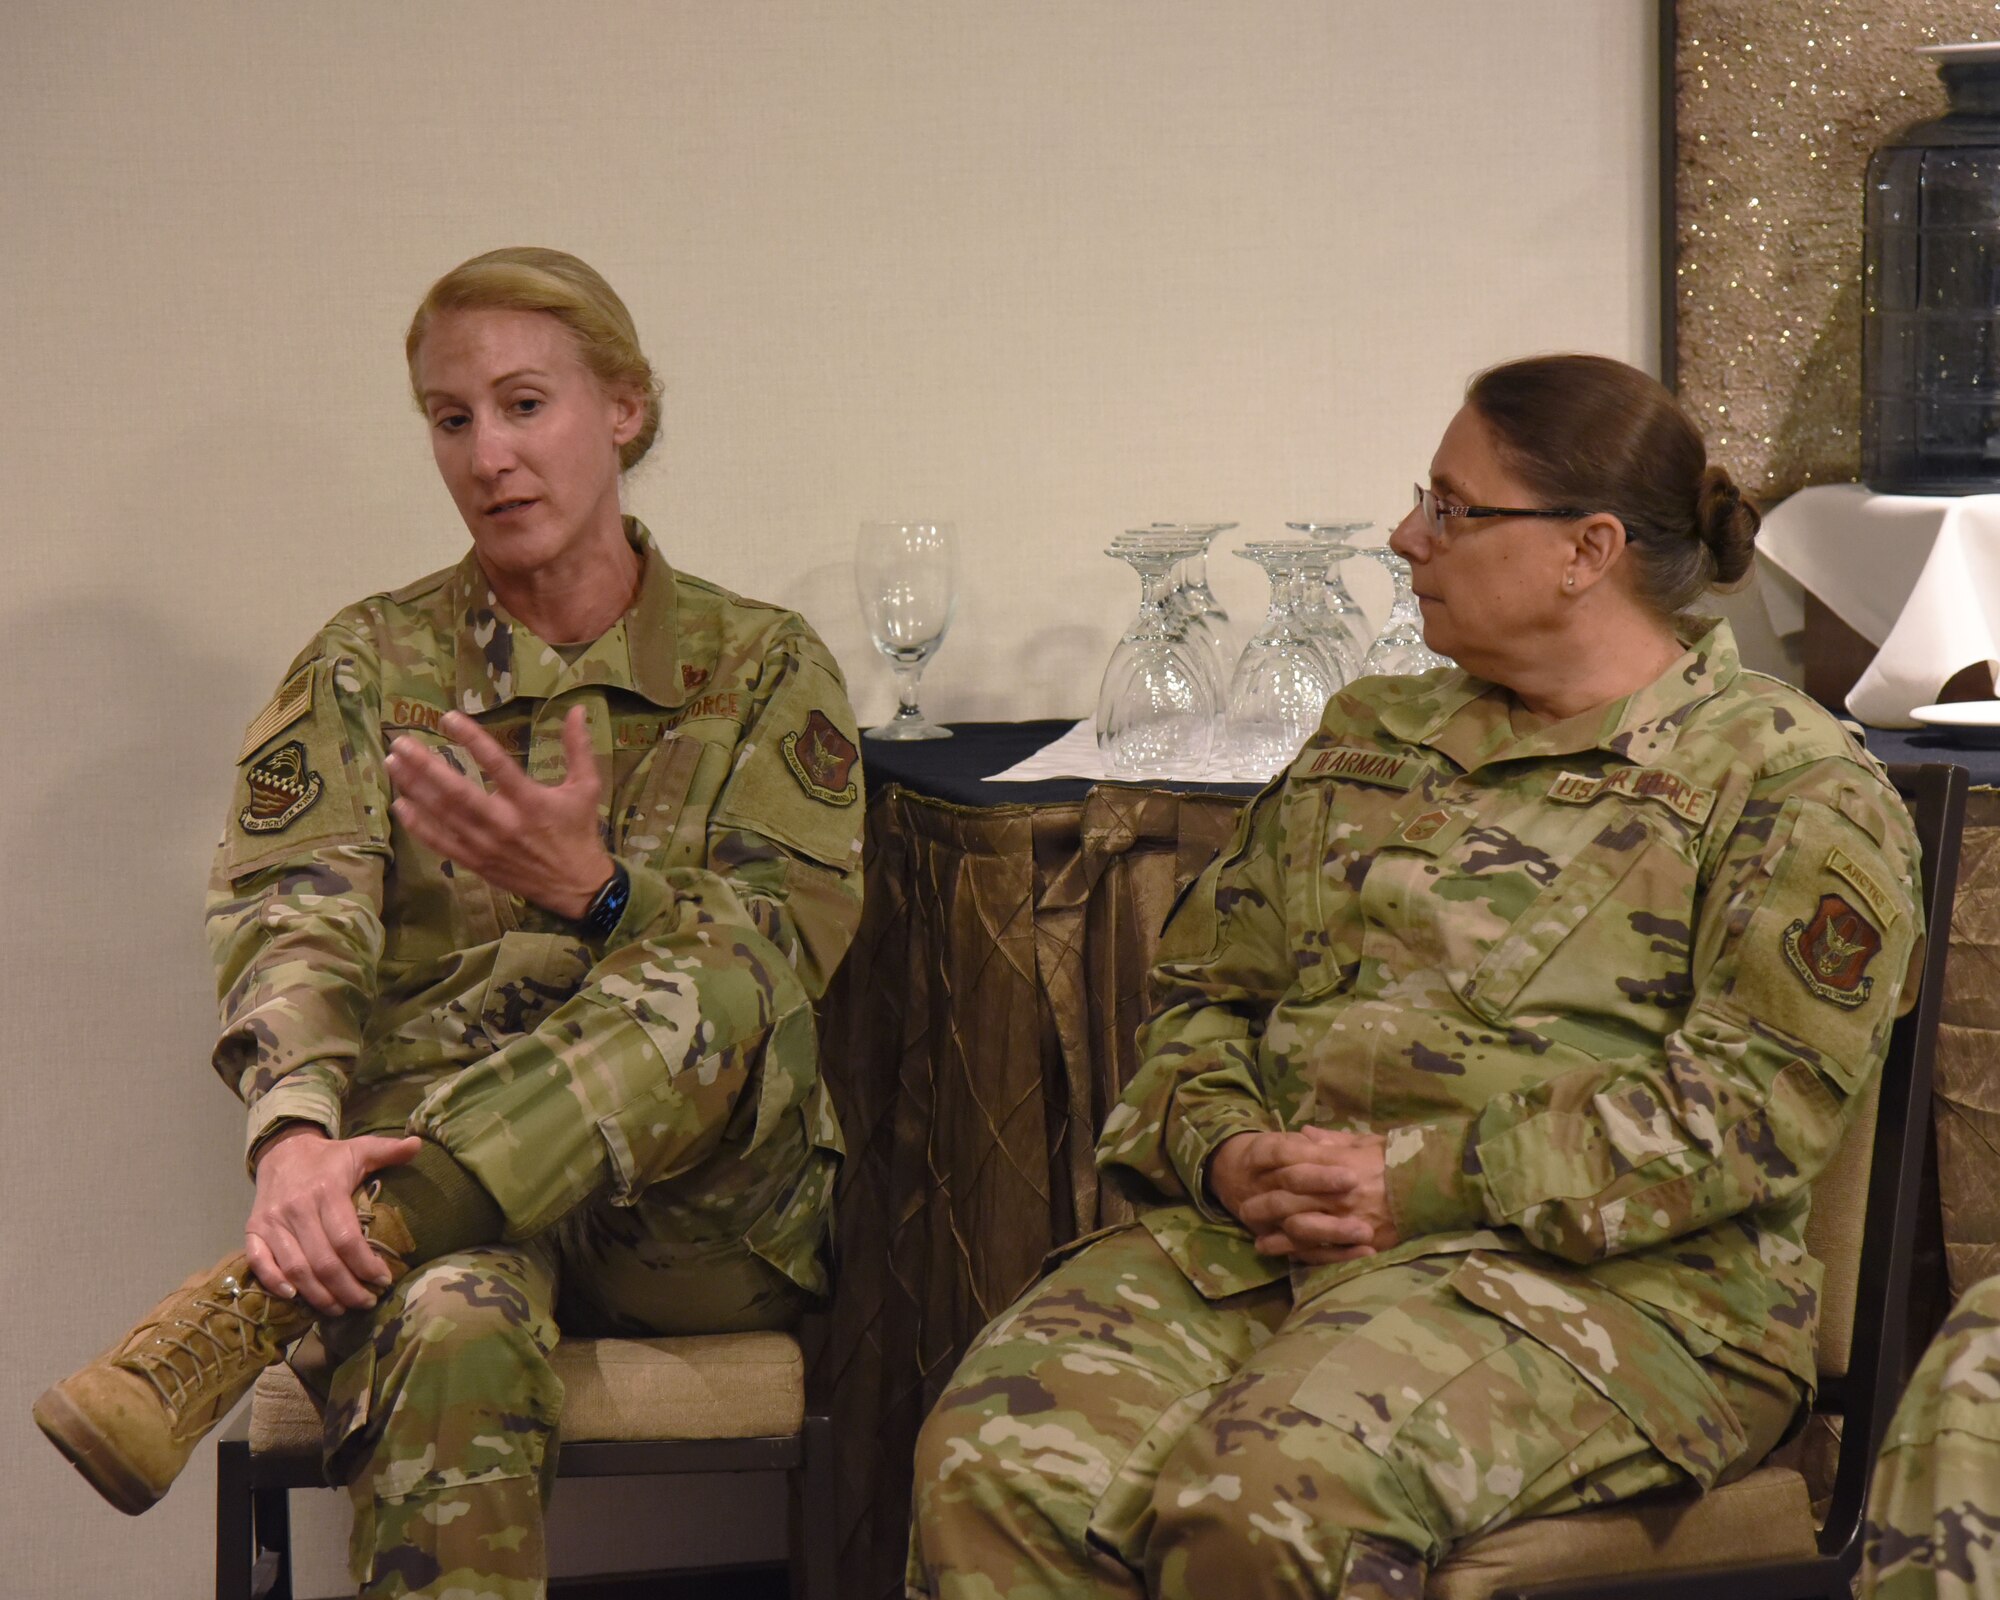 Chief Master Sgt. Mary E. Dearman, right, 477th Fighter Group senior enlisted leader, listens as Chief Master Sgt. Karie A. Contreras, 482nd Fighter Wing senior enlisted leader, discusses unit reform during the Annual Commanders and Command Chiefs management and leadership review event held in Fort Worth, Texas, June 20-23. The three-day session focused on disseminating information from 10th Air Force senior leaders to commanders and chief master sergeants on various topics to include budgeting, recruitment challenges and force restructure. (U.S. Air Force photo by 2nd Lt. Mary A. Andom)